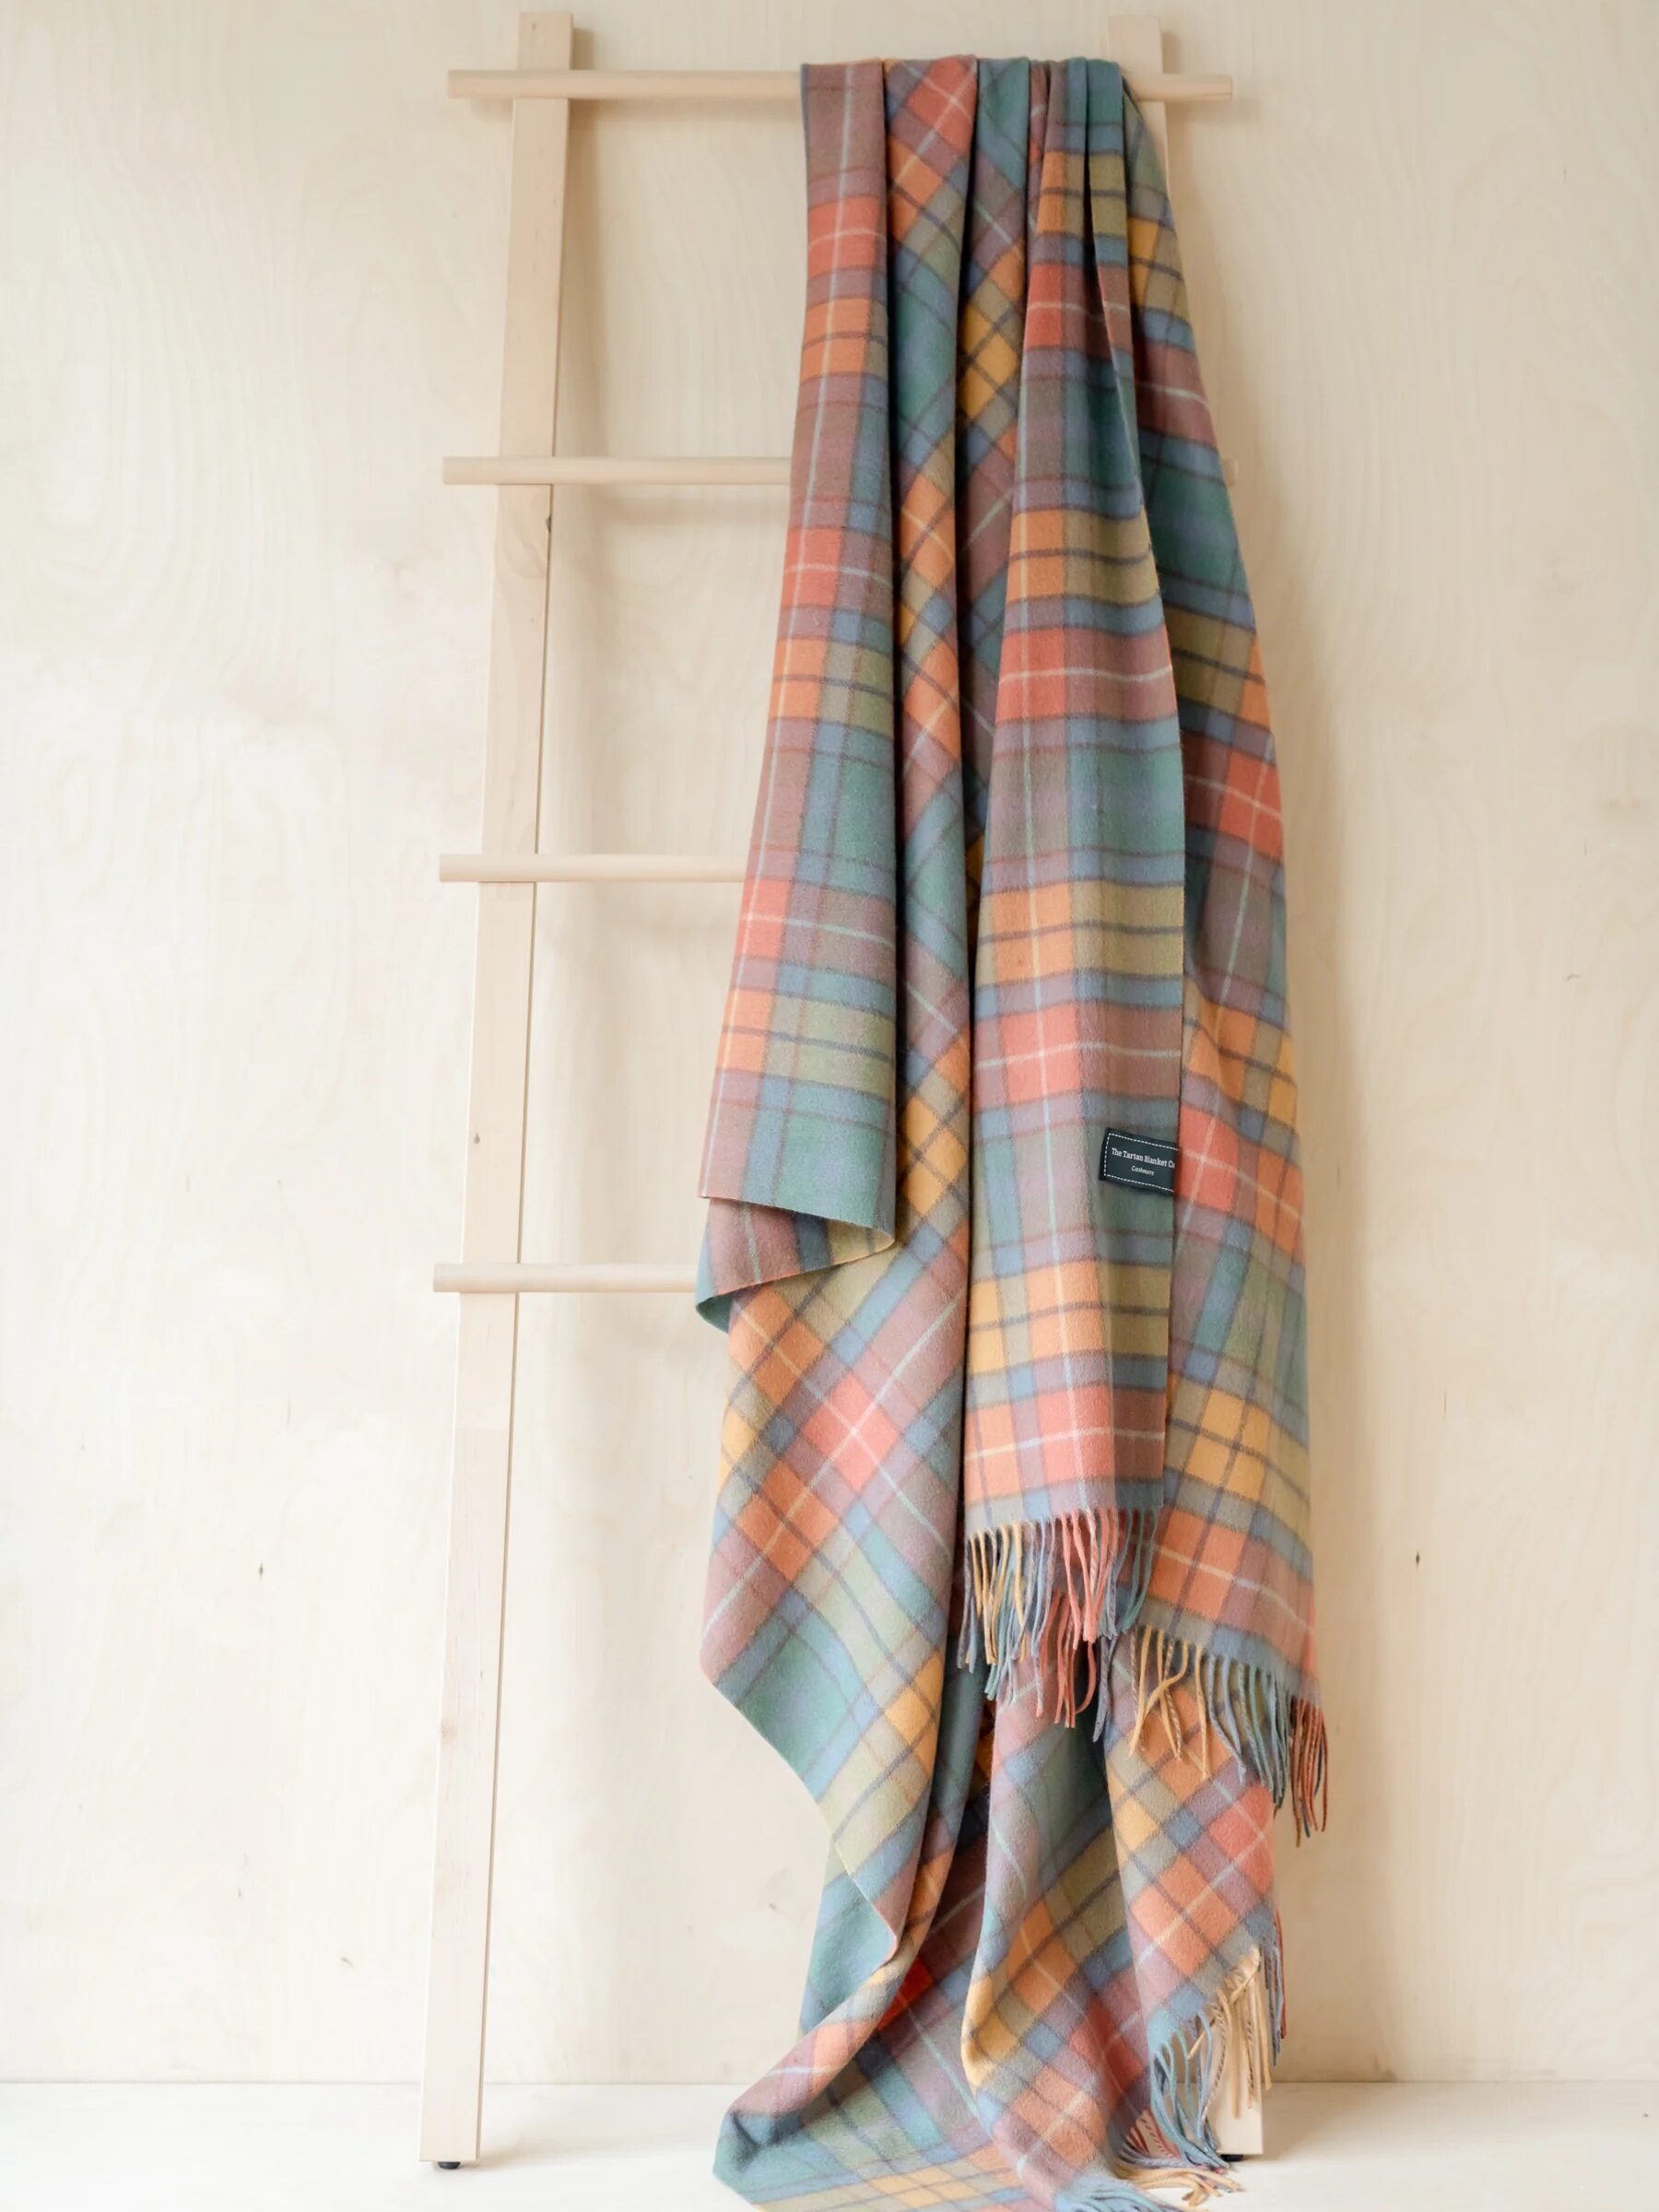 A multicolored plaid blanket is draped over a wooden ladder against a light-colored background.